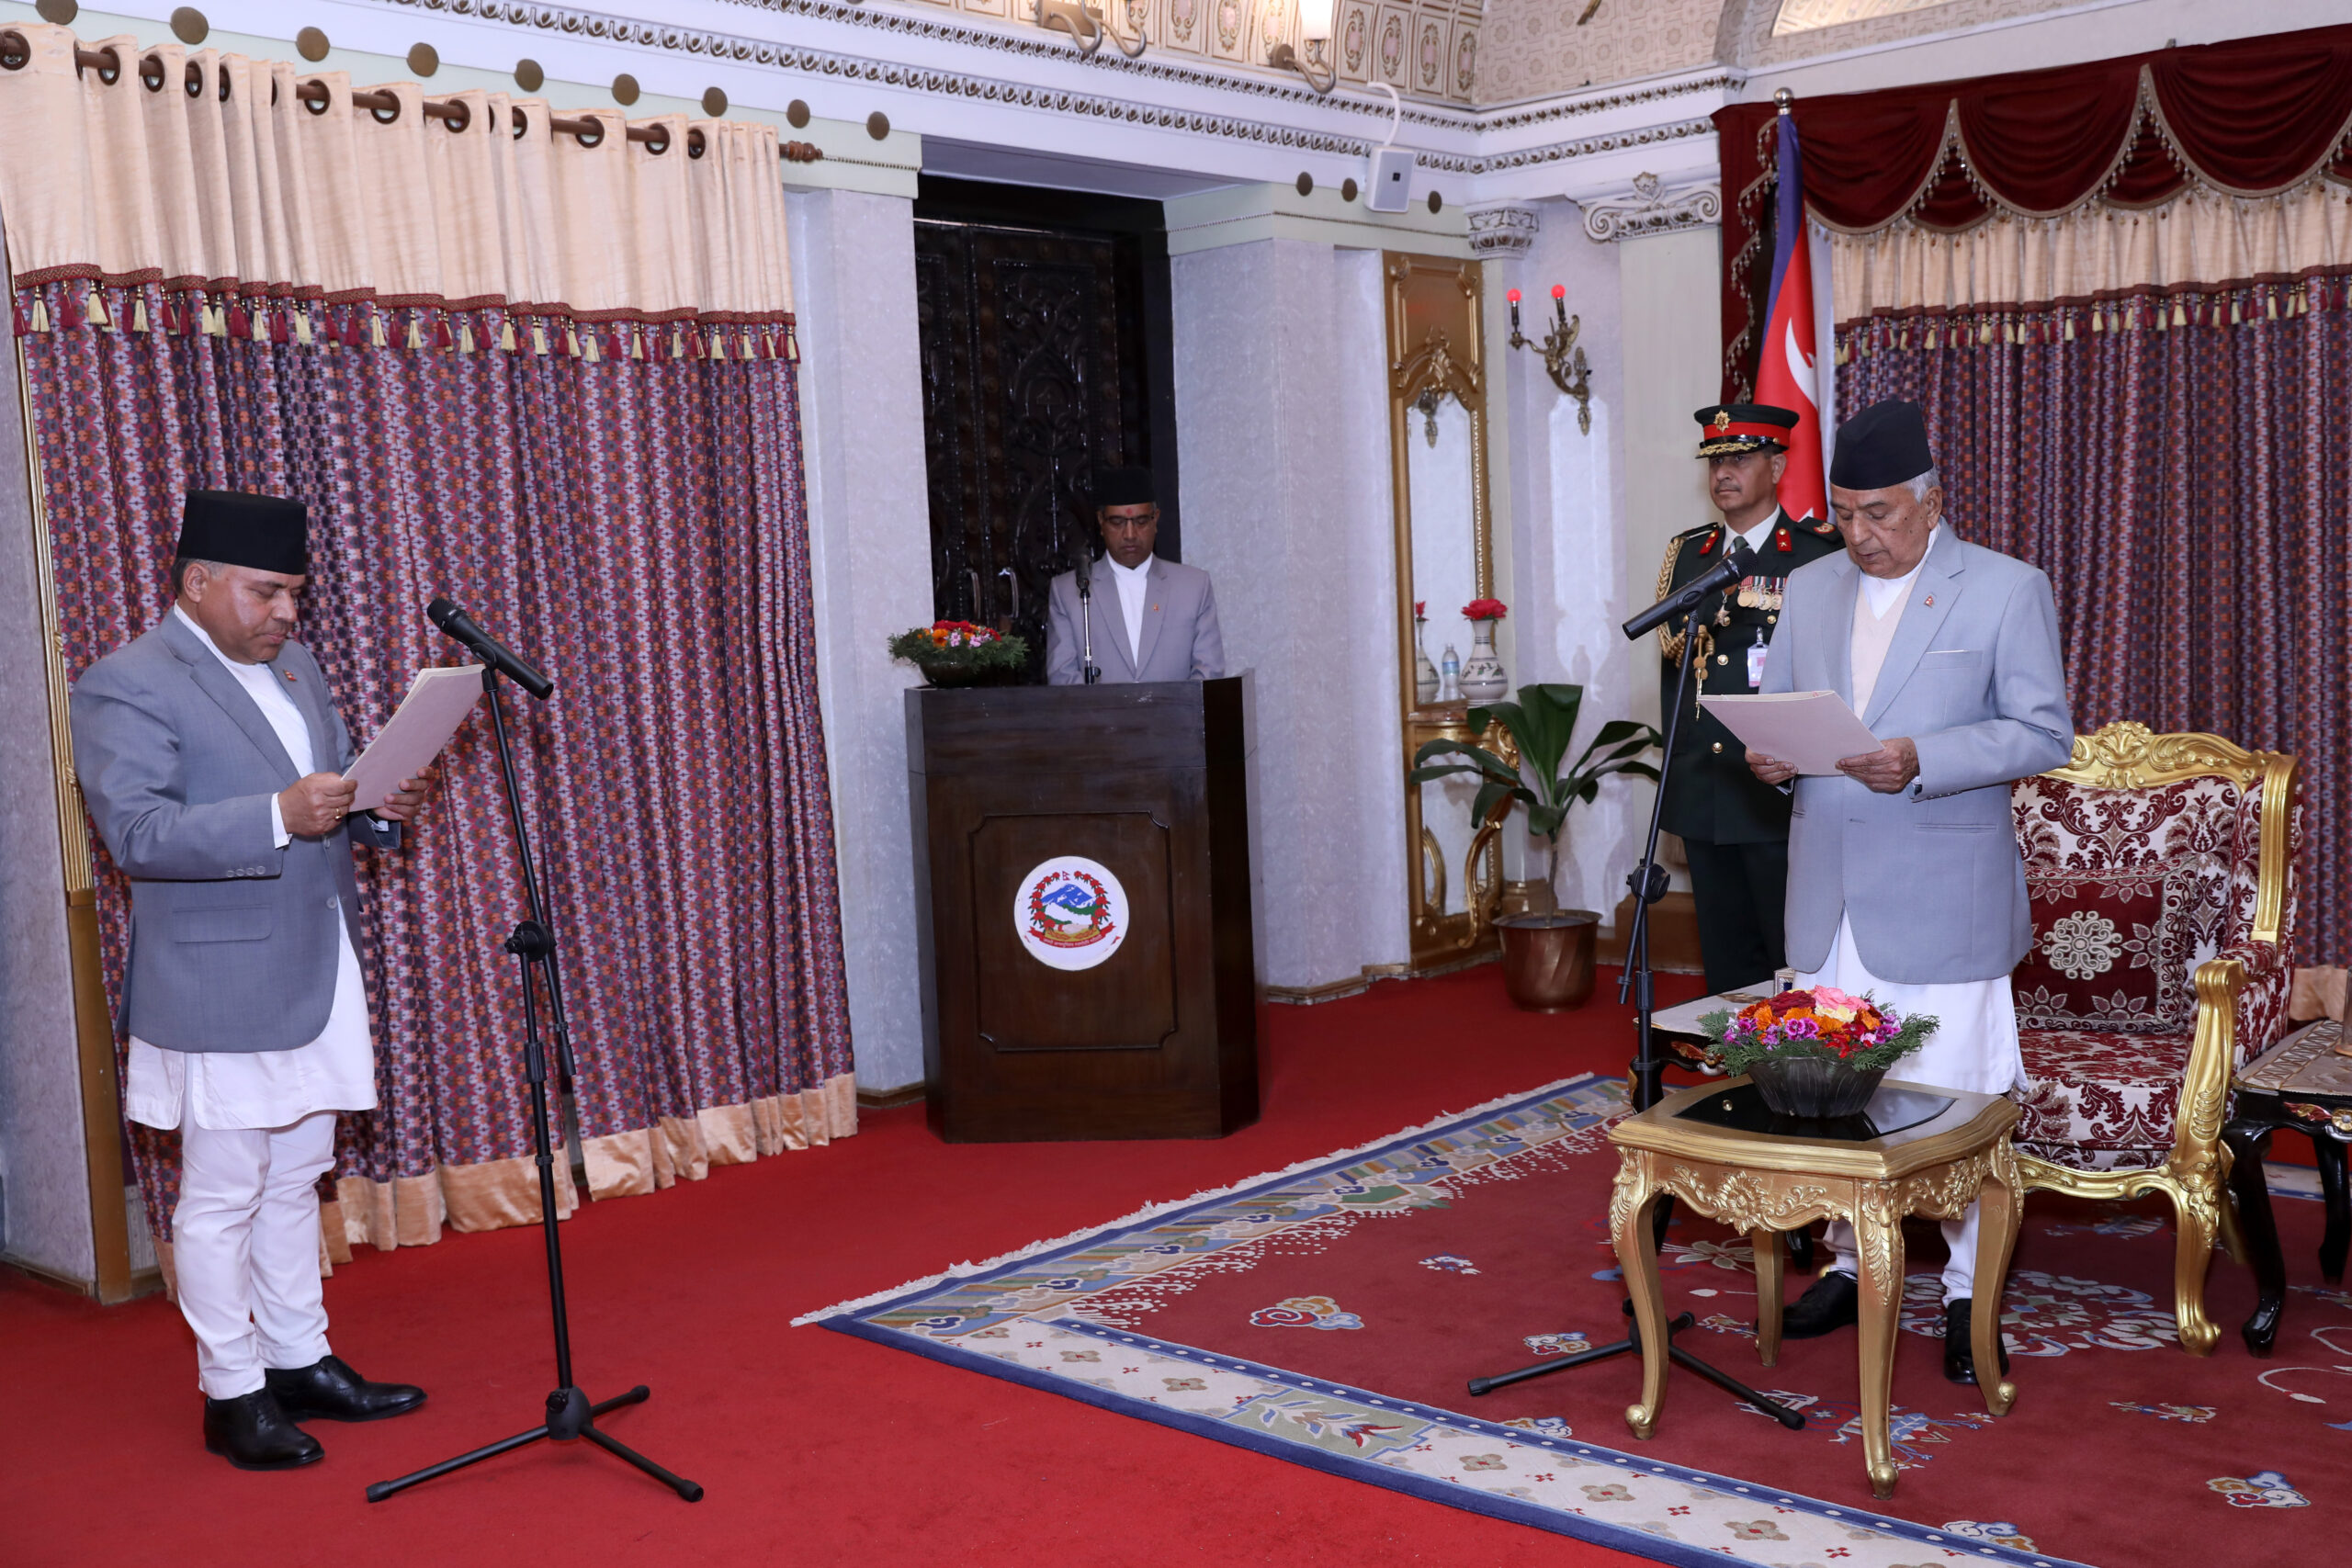 Swearing in by newly appointed Ambassador Paudel to Canada